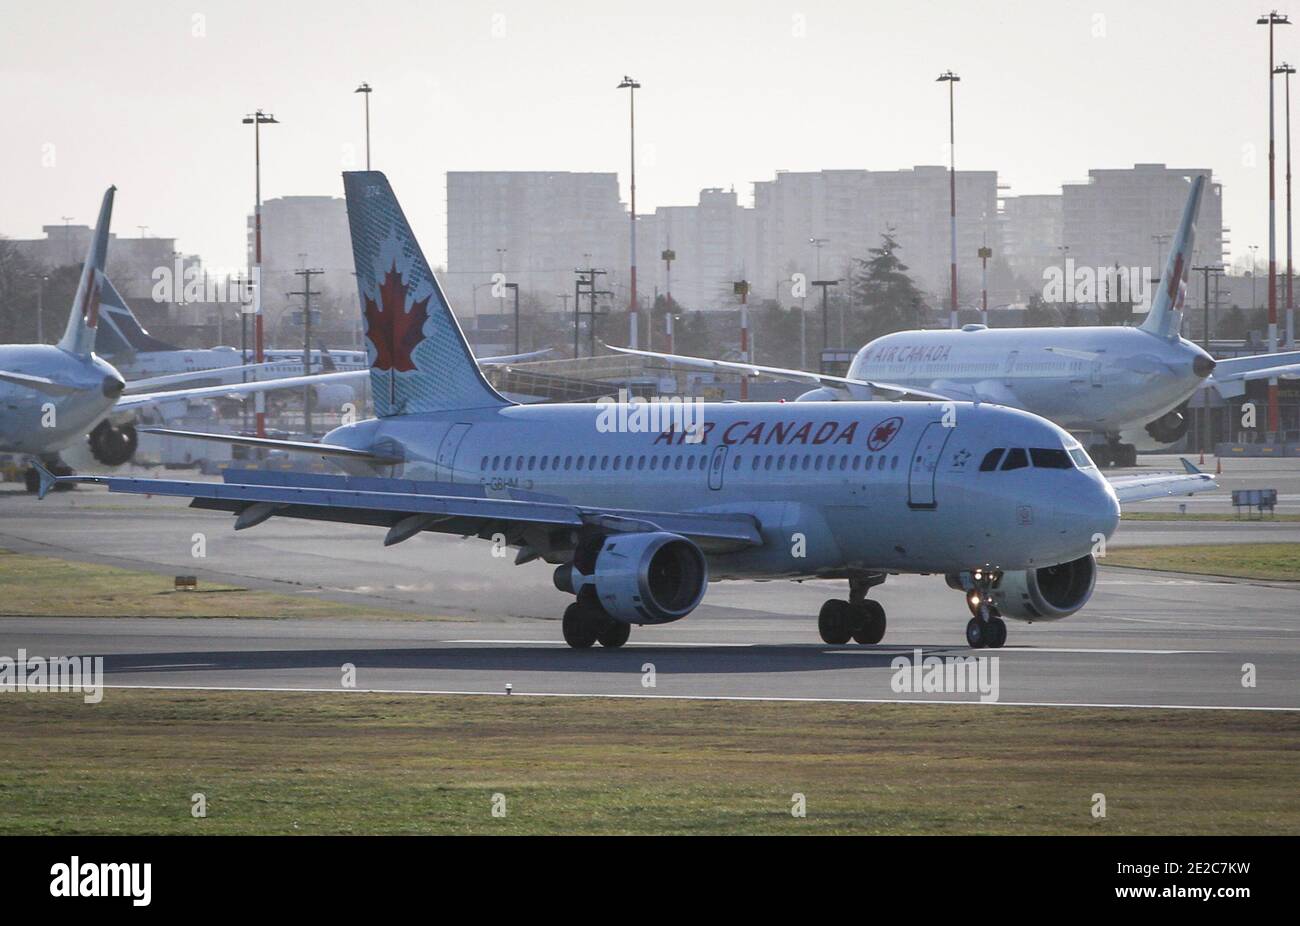 Richmond, Canada. 13th Jan, 2021. Air Canada aircrafts are seen on the runway of Vancouver International Airport in Richmond, British Columbia, Canada, Jan. 13, 2021. Air Canada announced on Wednesday that it is laying off about 1,700 employees due to official travel restrictions against the rampaging COVID-19 pandemic. Credit: Liang Sen/Xinhua/Alamy Live News Stock Photo